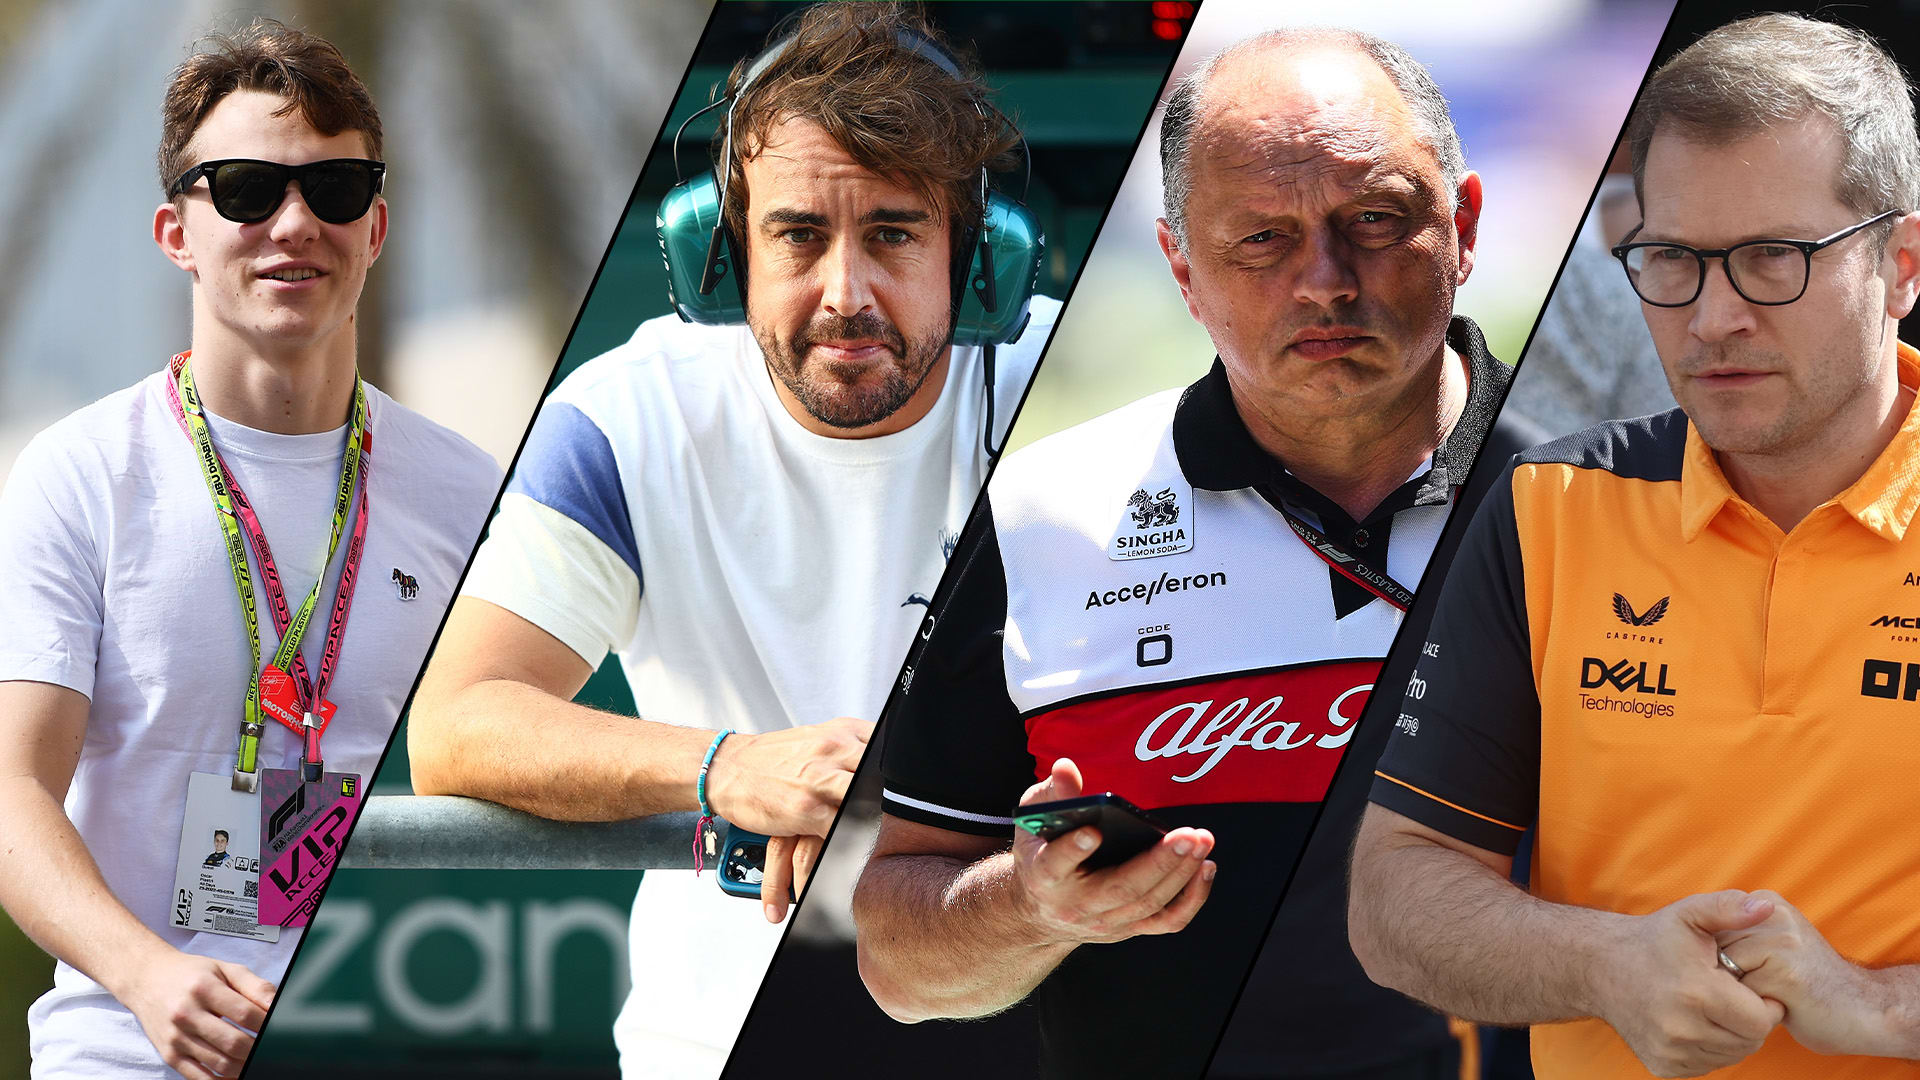 lungebetændelse Ansigt opad fatning Driver swaps and team boss switches – All the big moves you need to know  about ahead of 2023 season | Formula 1®